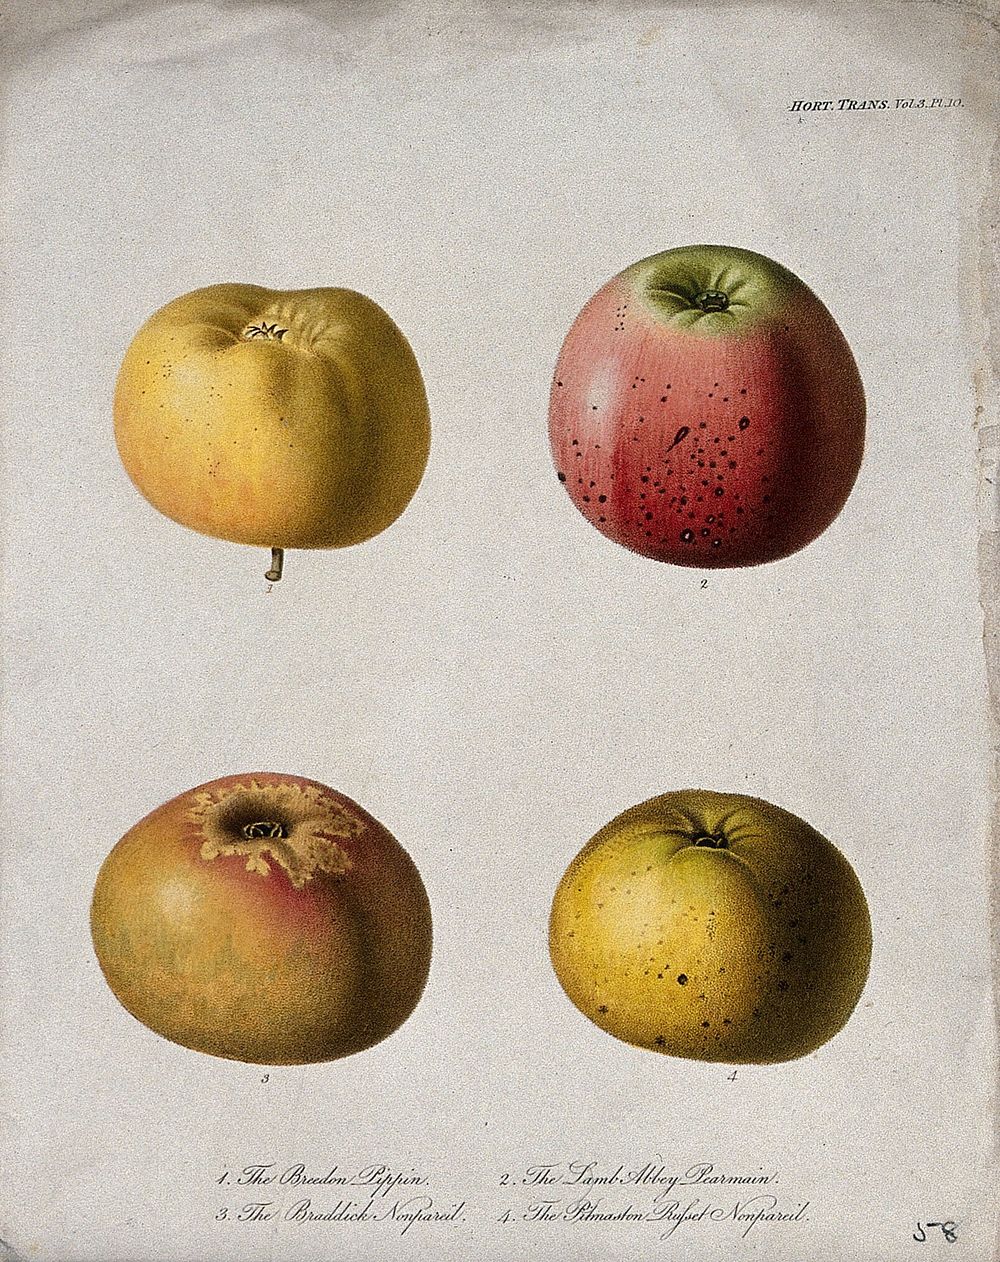 Four cultivars of apple (Malus pumila cv.): entire fruit. Coloured etching, c. 1820.